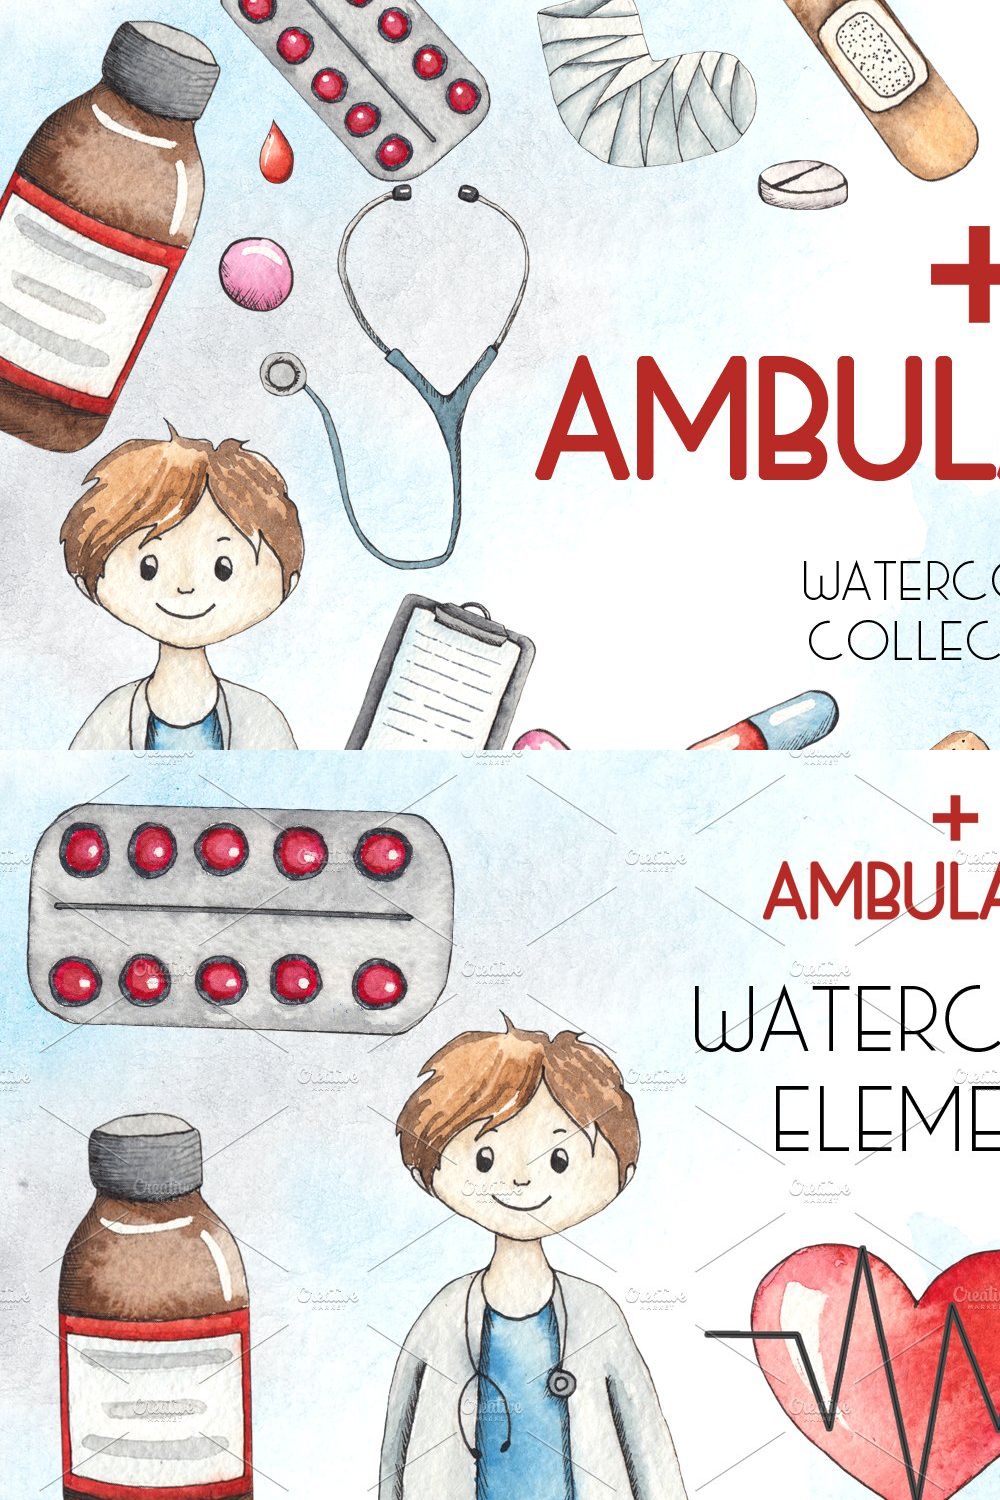 Ambulance. Watercolor collection pinterest preview image.